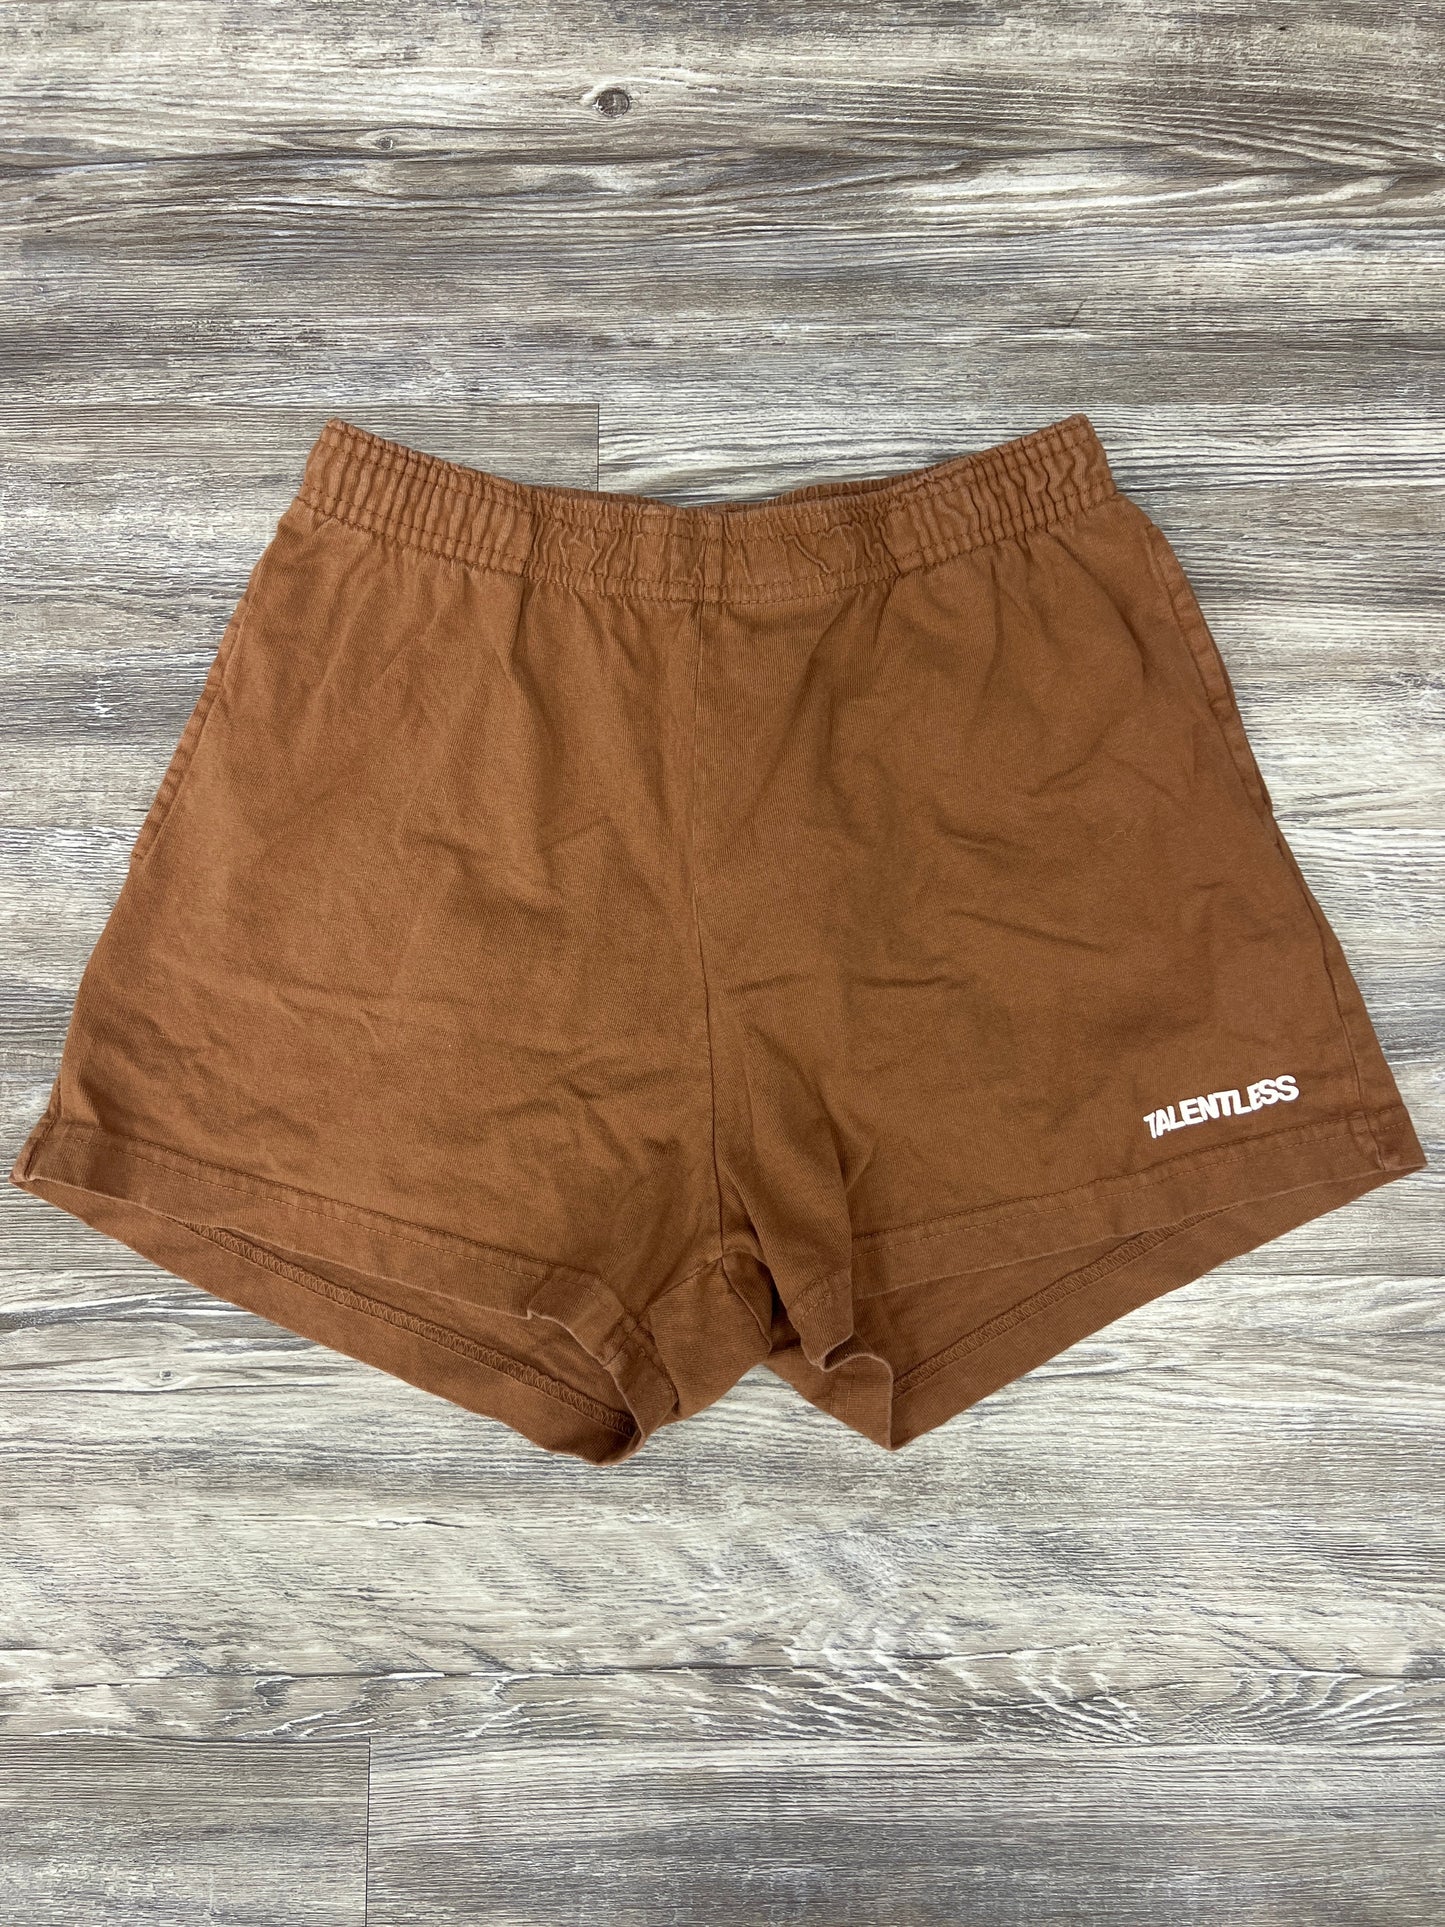 Shorts By Talentless Size: S